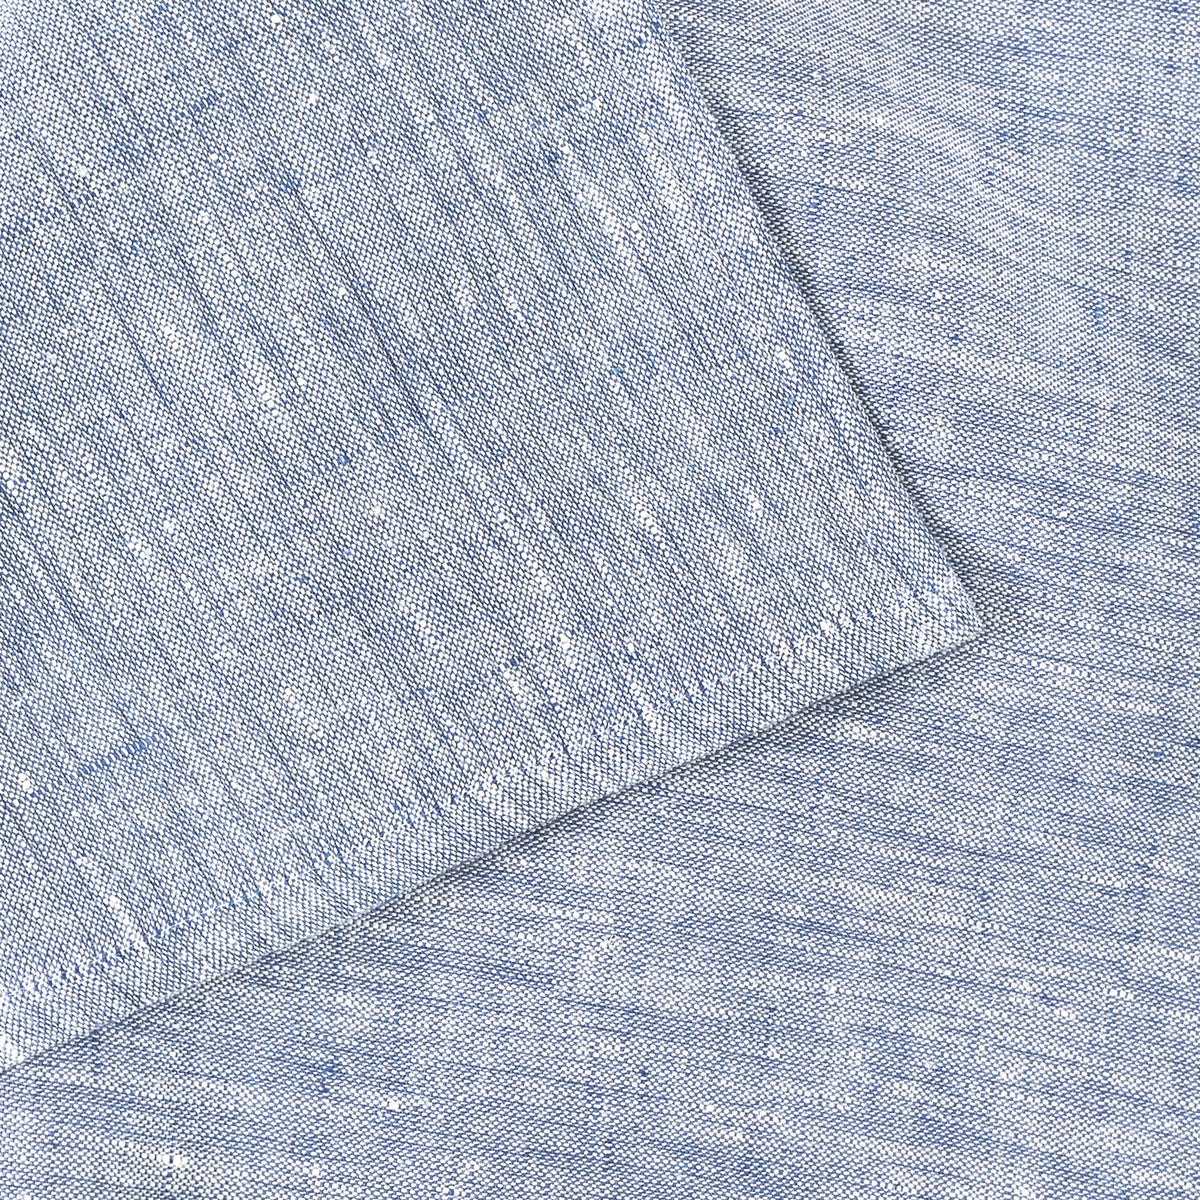 https://cdn.shopify.com/s/files/1/0557/8840/4900/products/linen-placemat-tabletop-hosting-dining-chambray-detail_1200x.jpg?v=1698368055